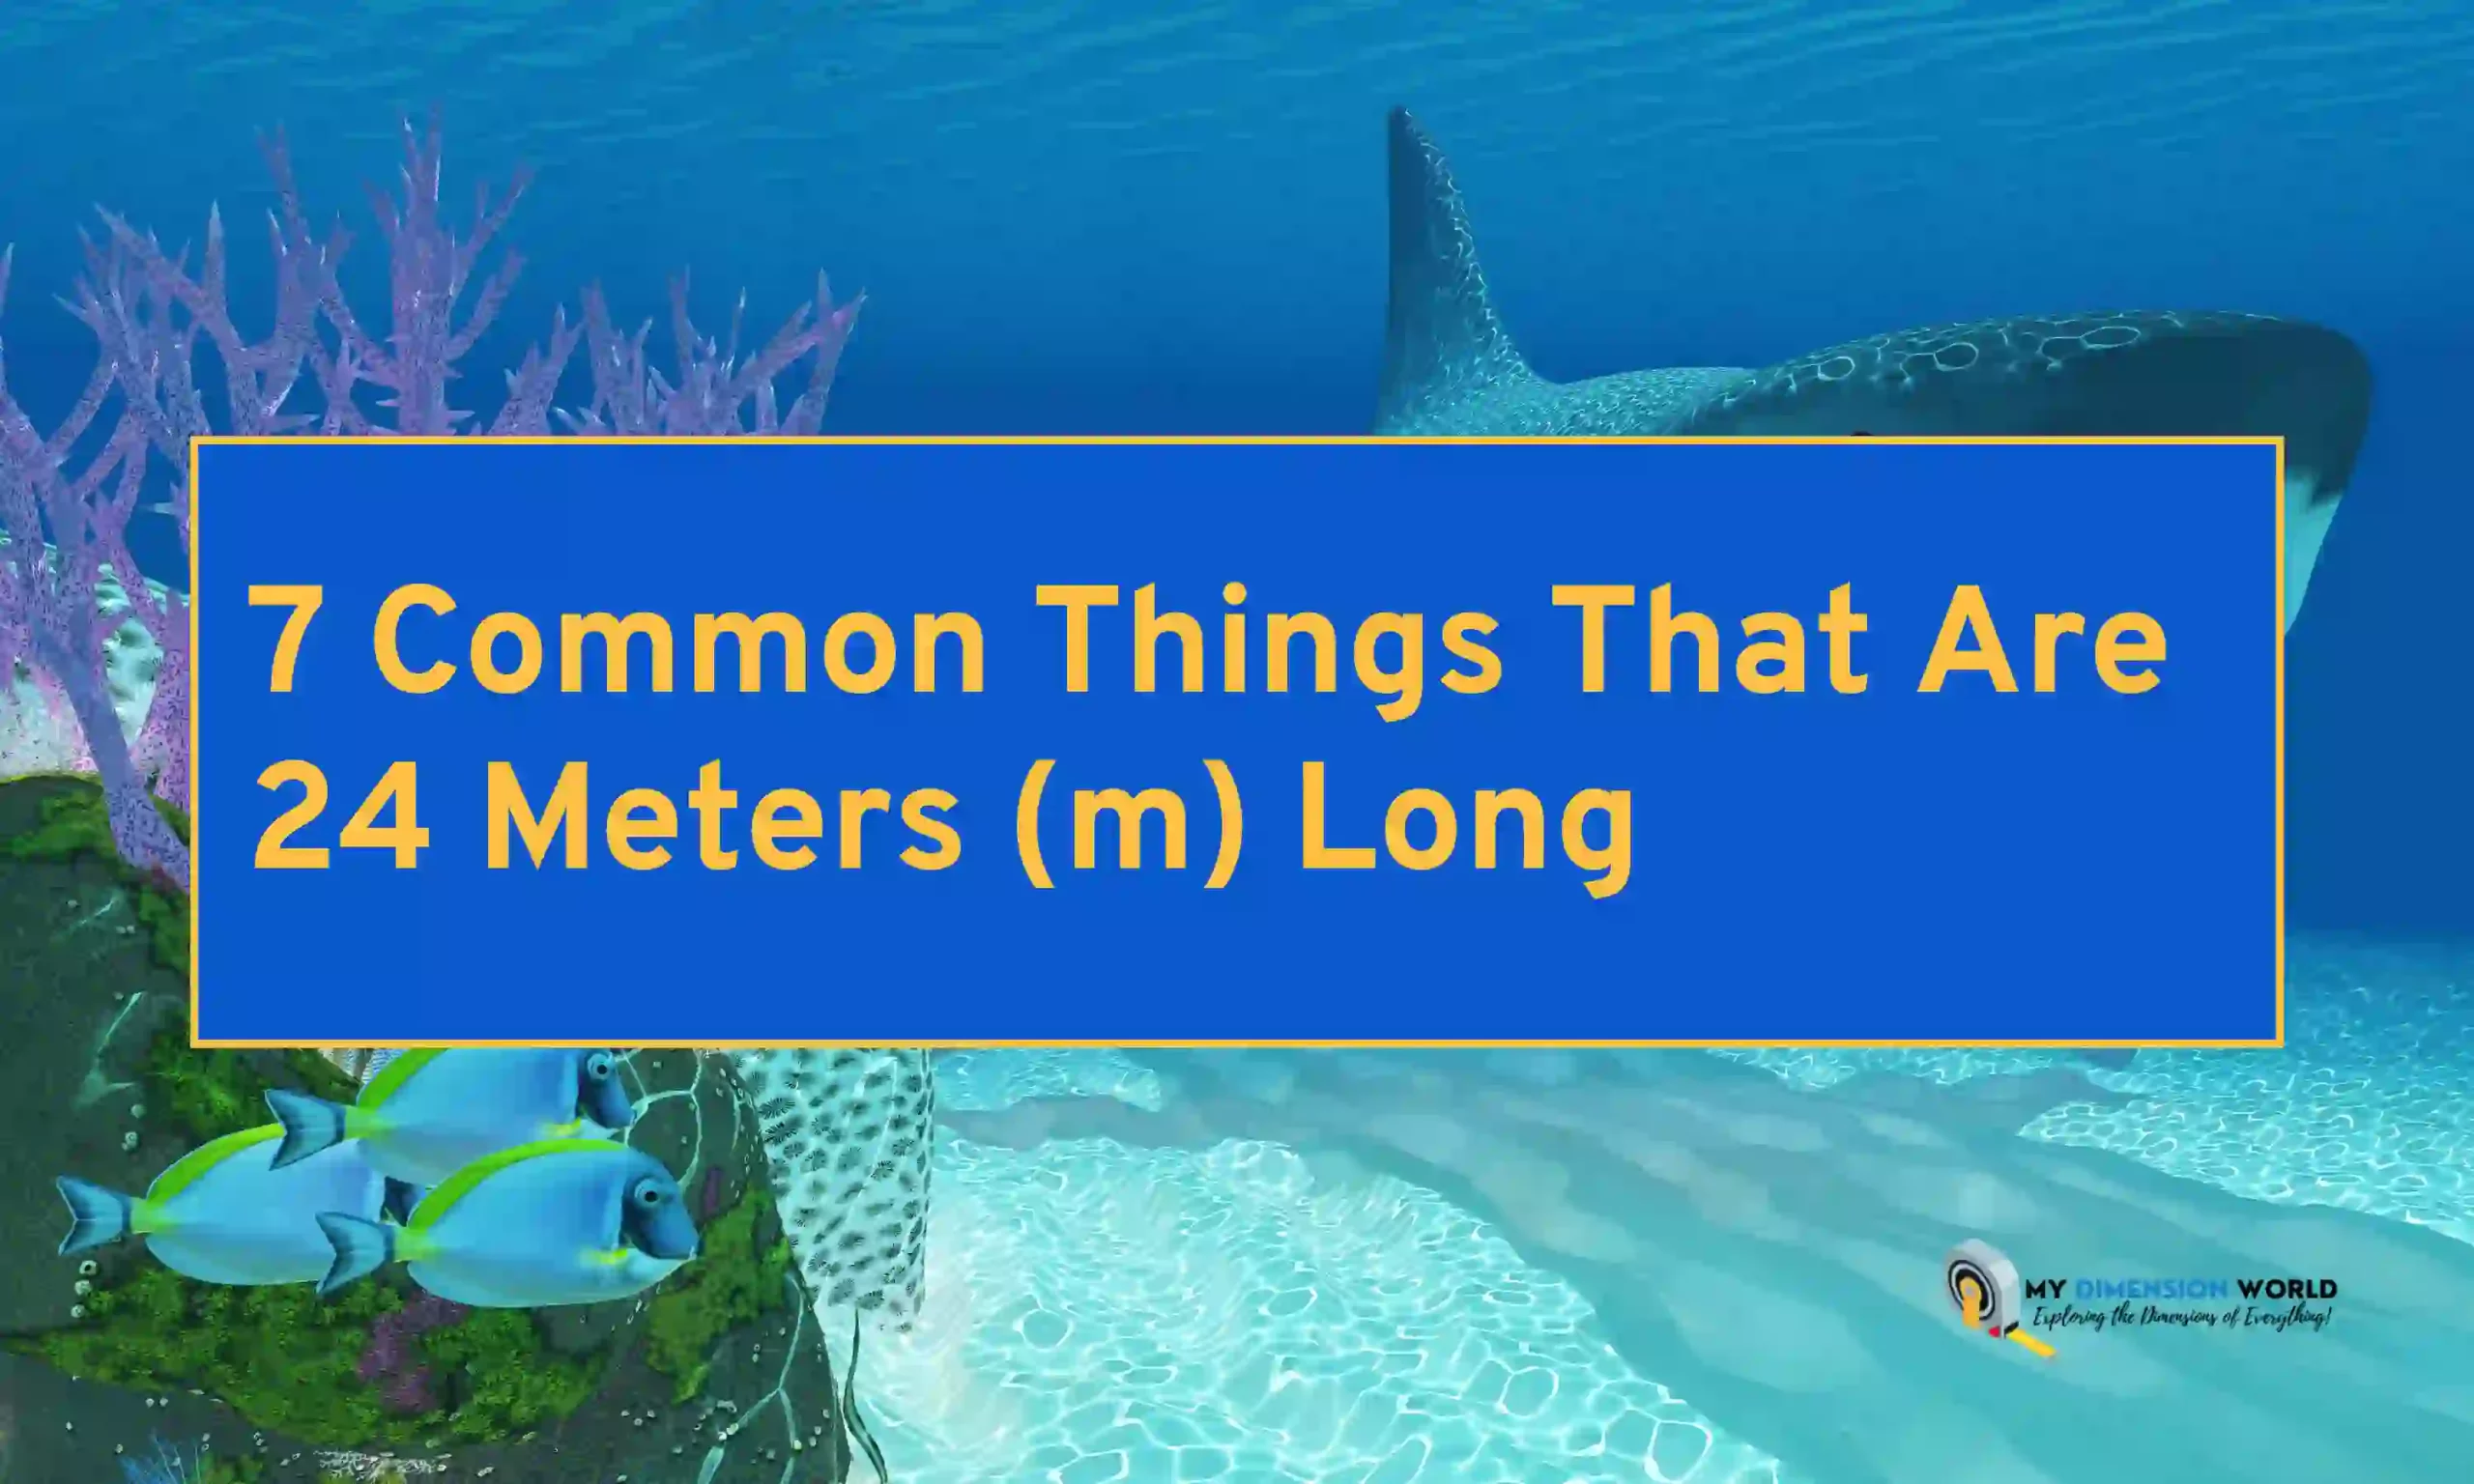 7 Common Things That Are 24 Meters (m) Long